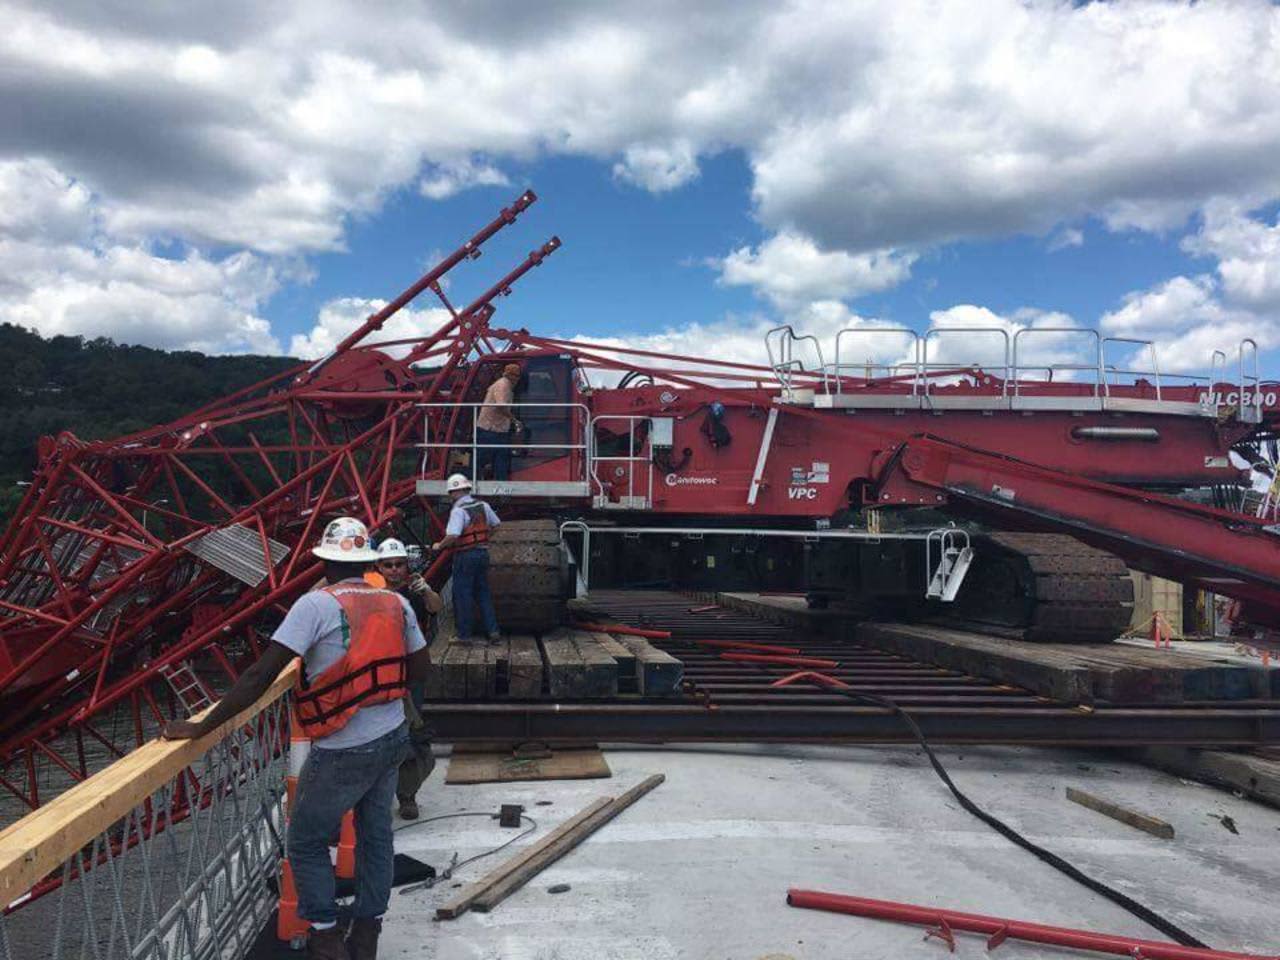 A shot of the crane that collapsed onto the Tappan Zee Bridge, snarling traffic Tuesday afternoon.